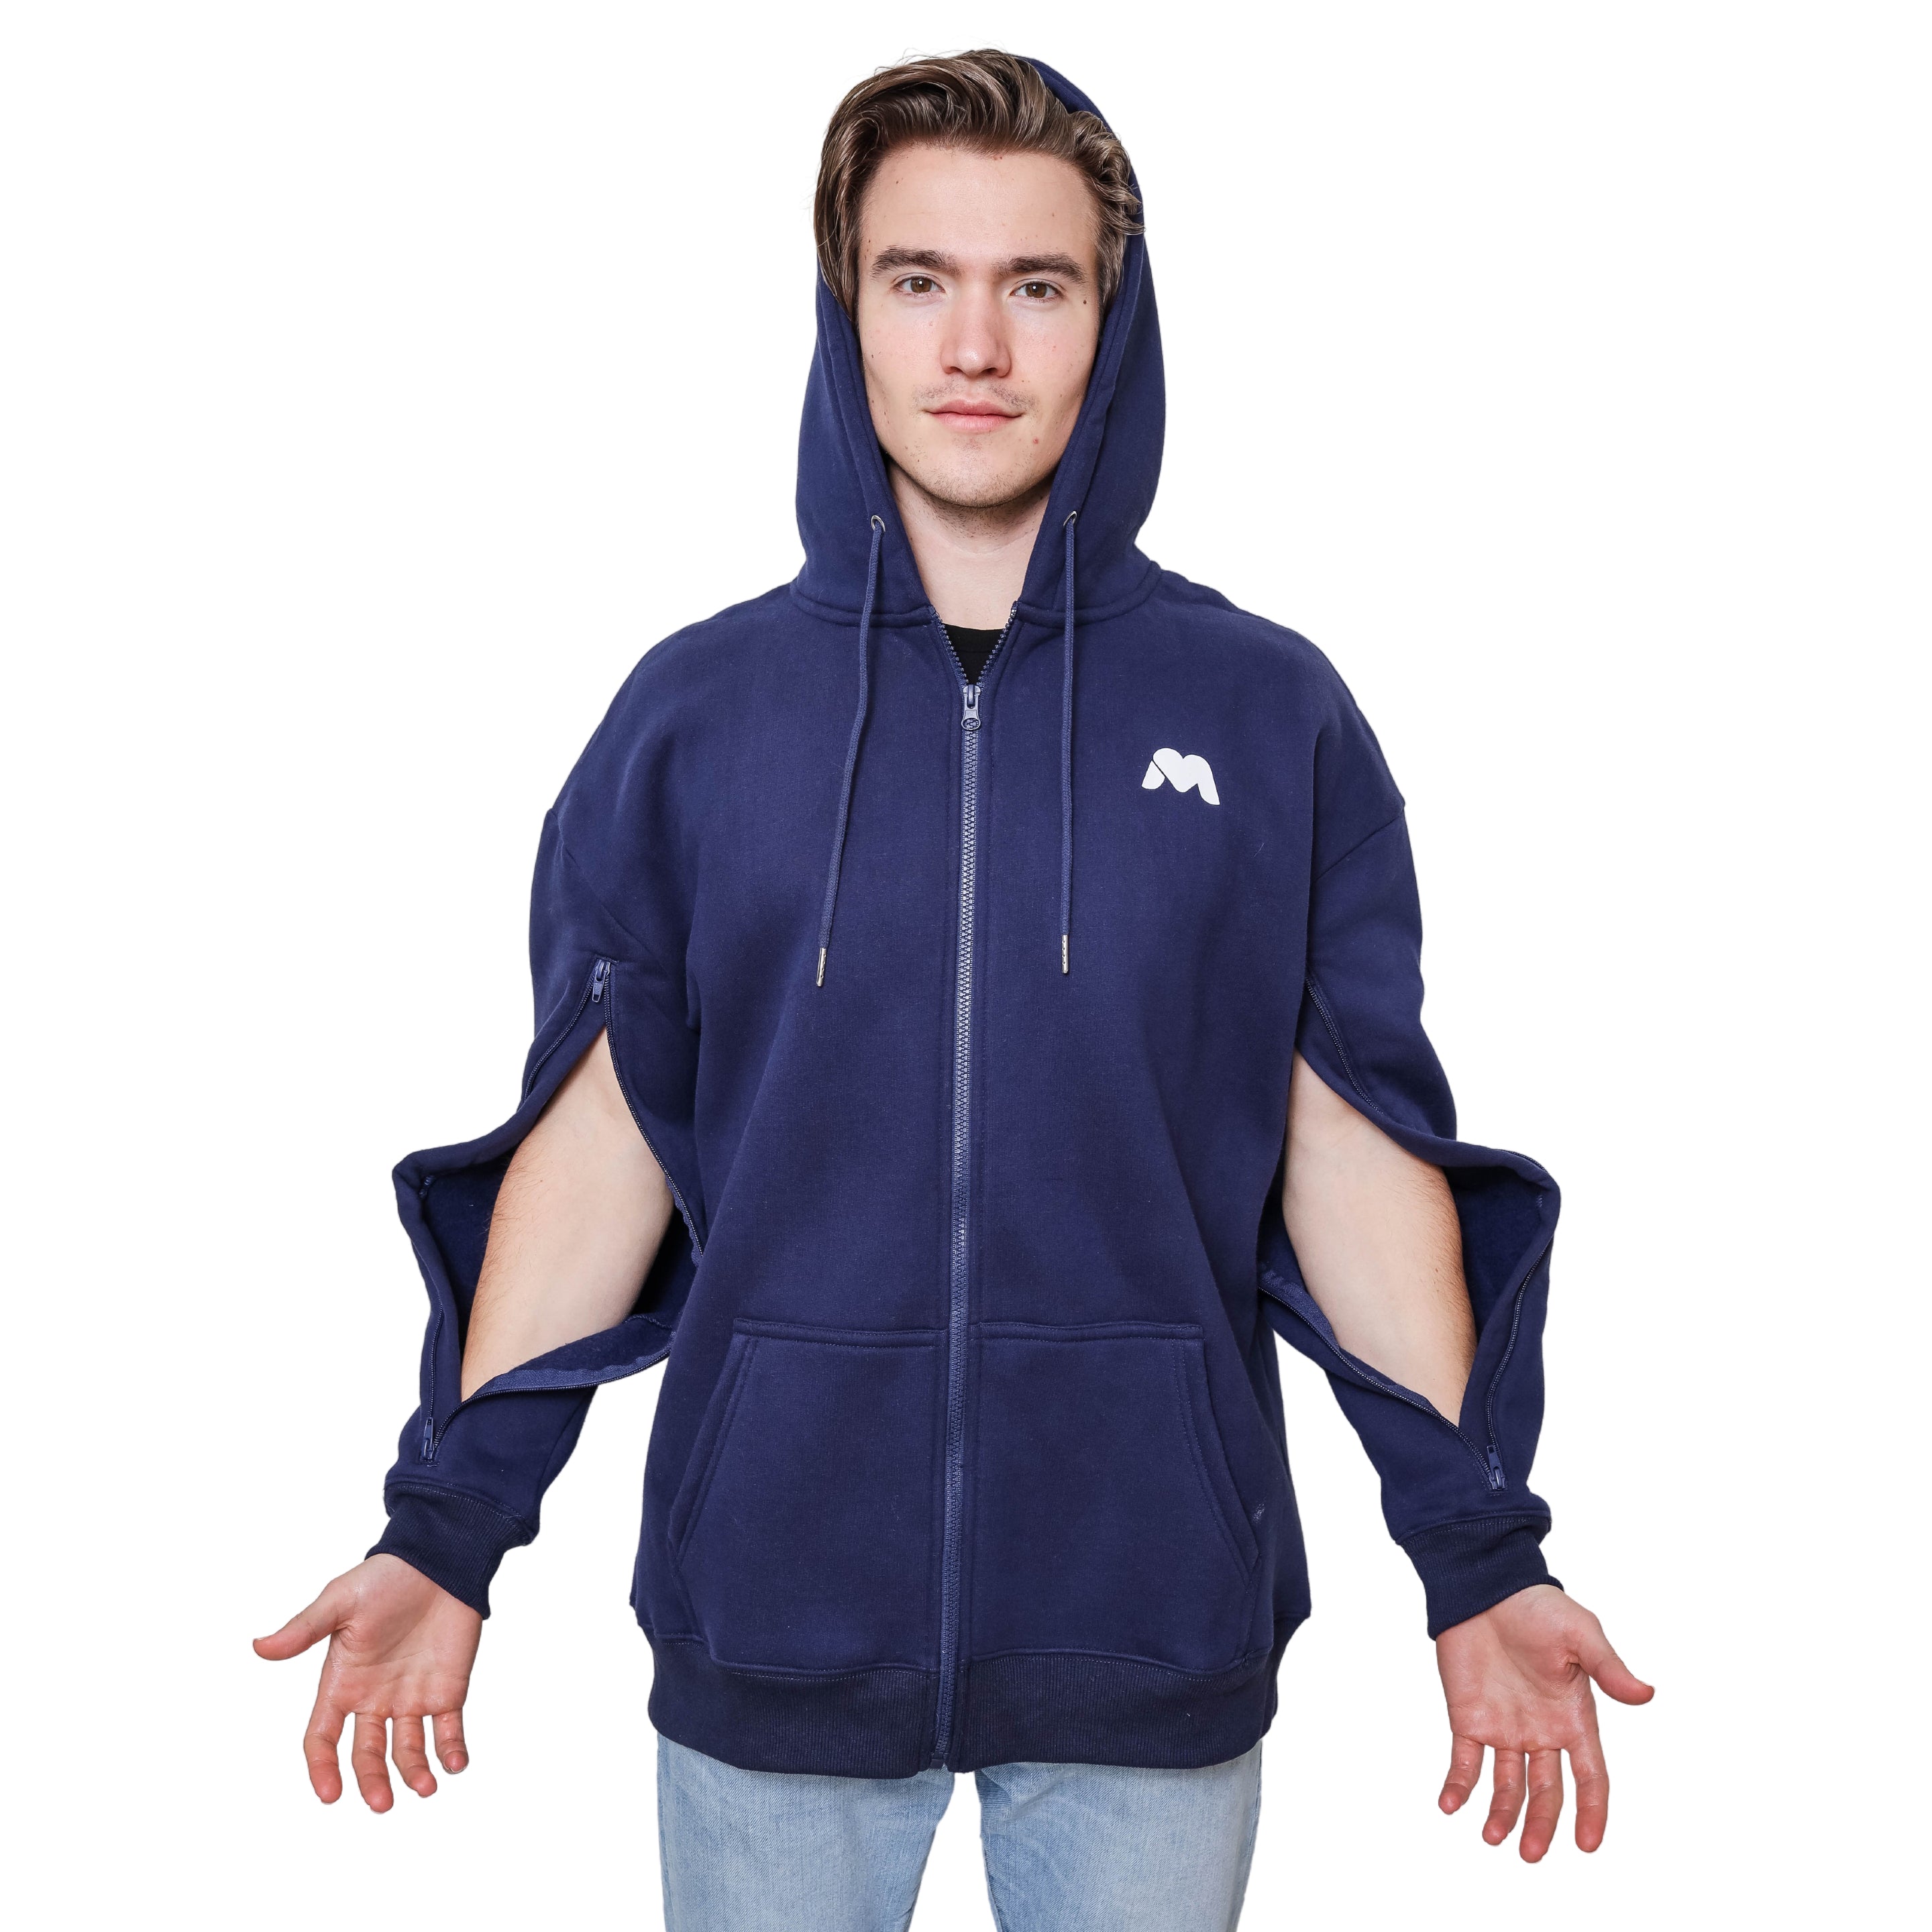 Arm Access Oversized Hoodies for Men and Women